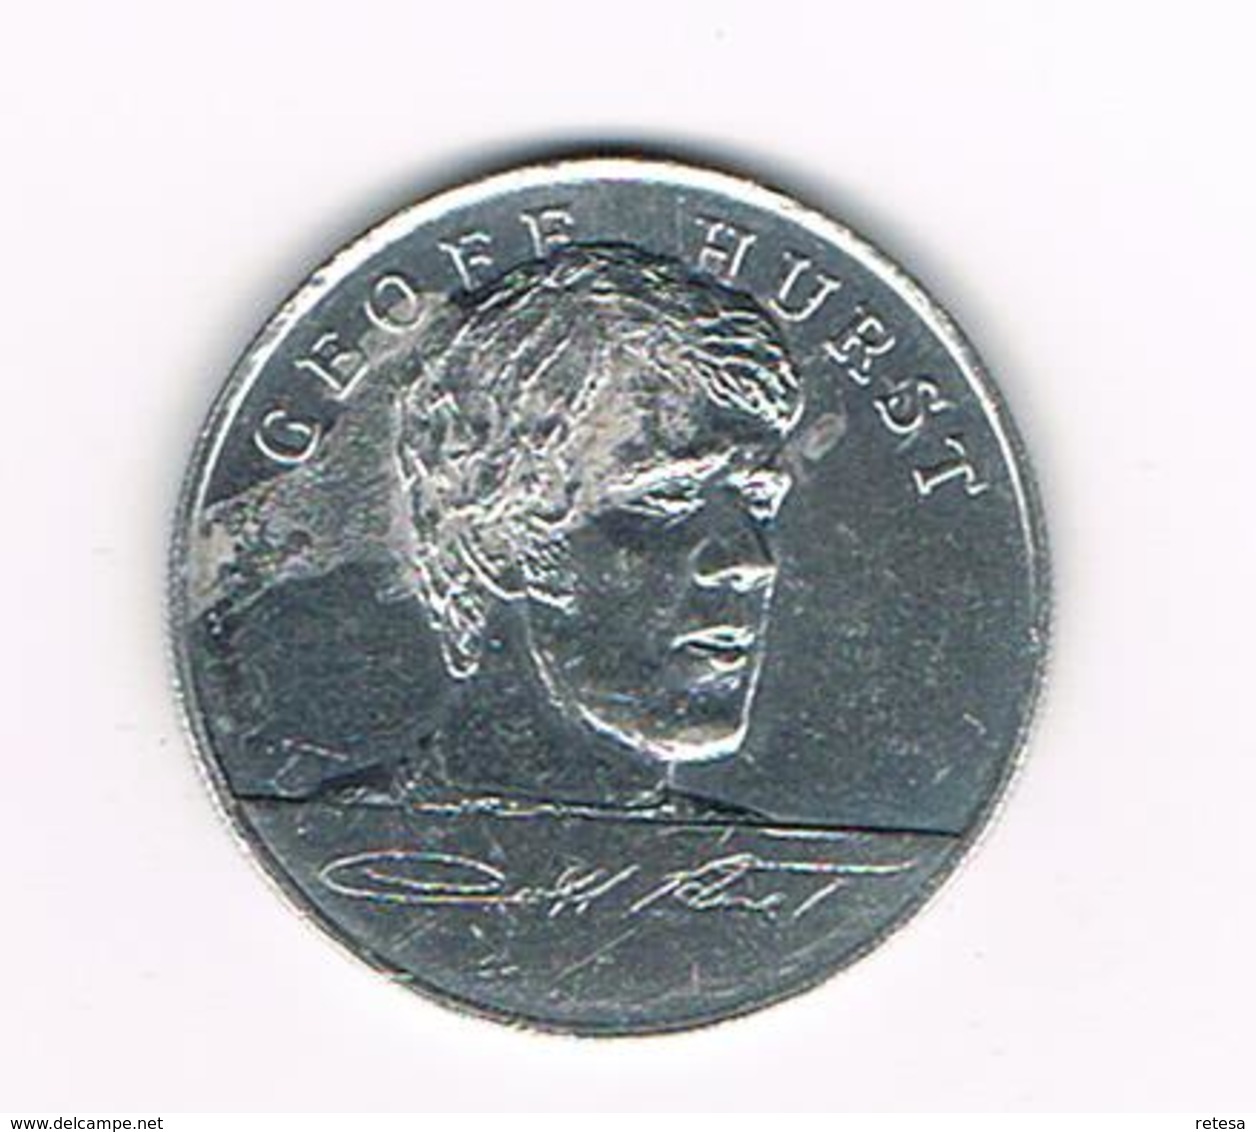 //  TOKEN  GEOFF HURST  ENGLAND WORLD CUP  SQUAD  MEXICO  1970 ESSO - Souvenir-Medaille (elongated Coins)